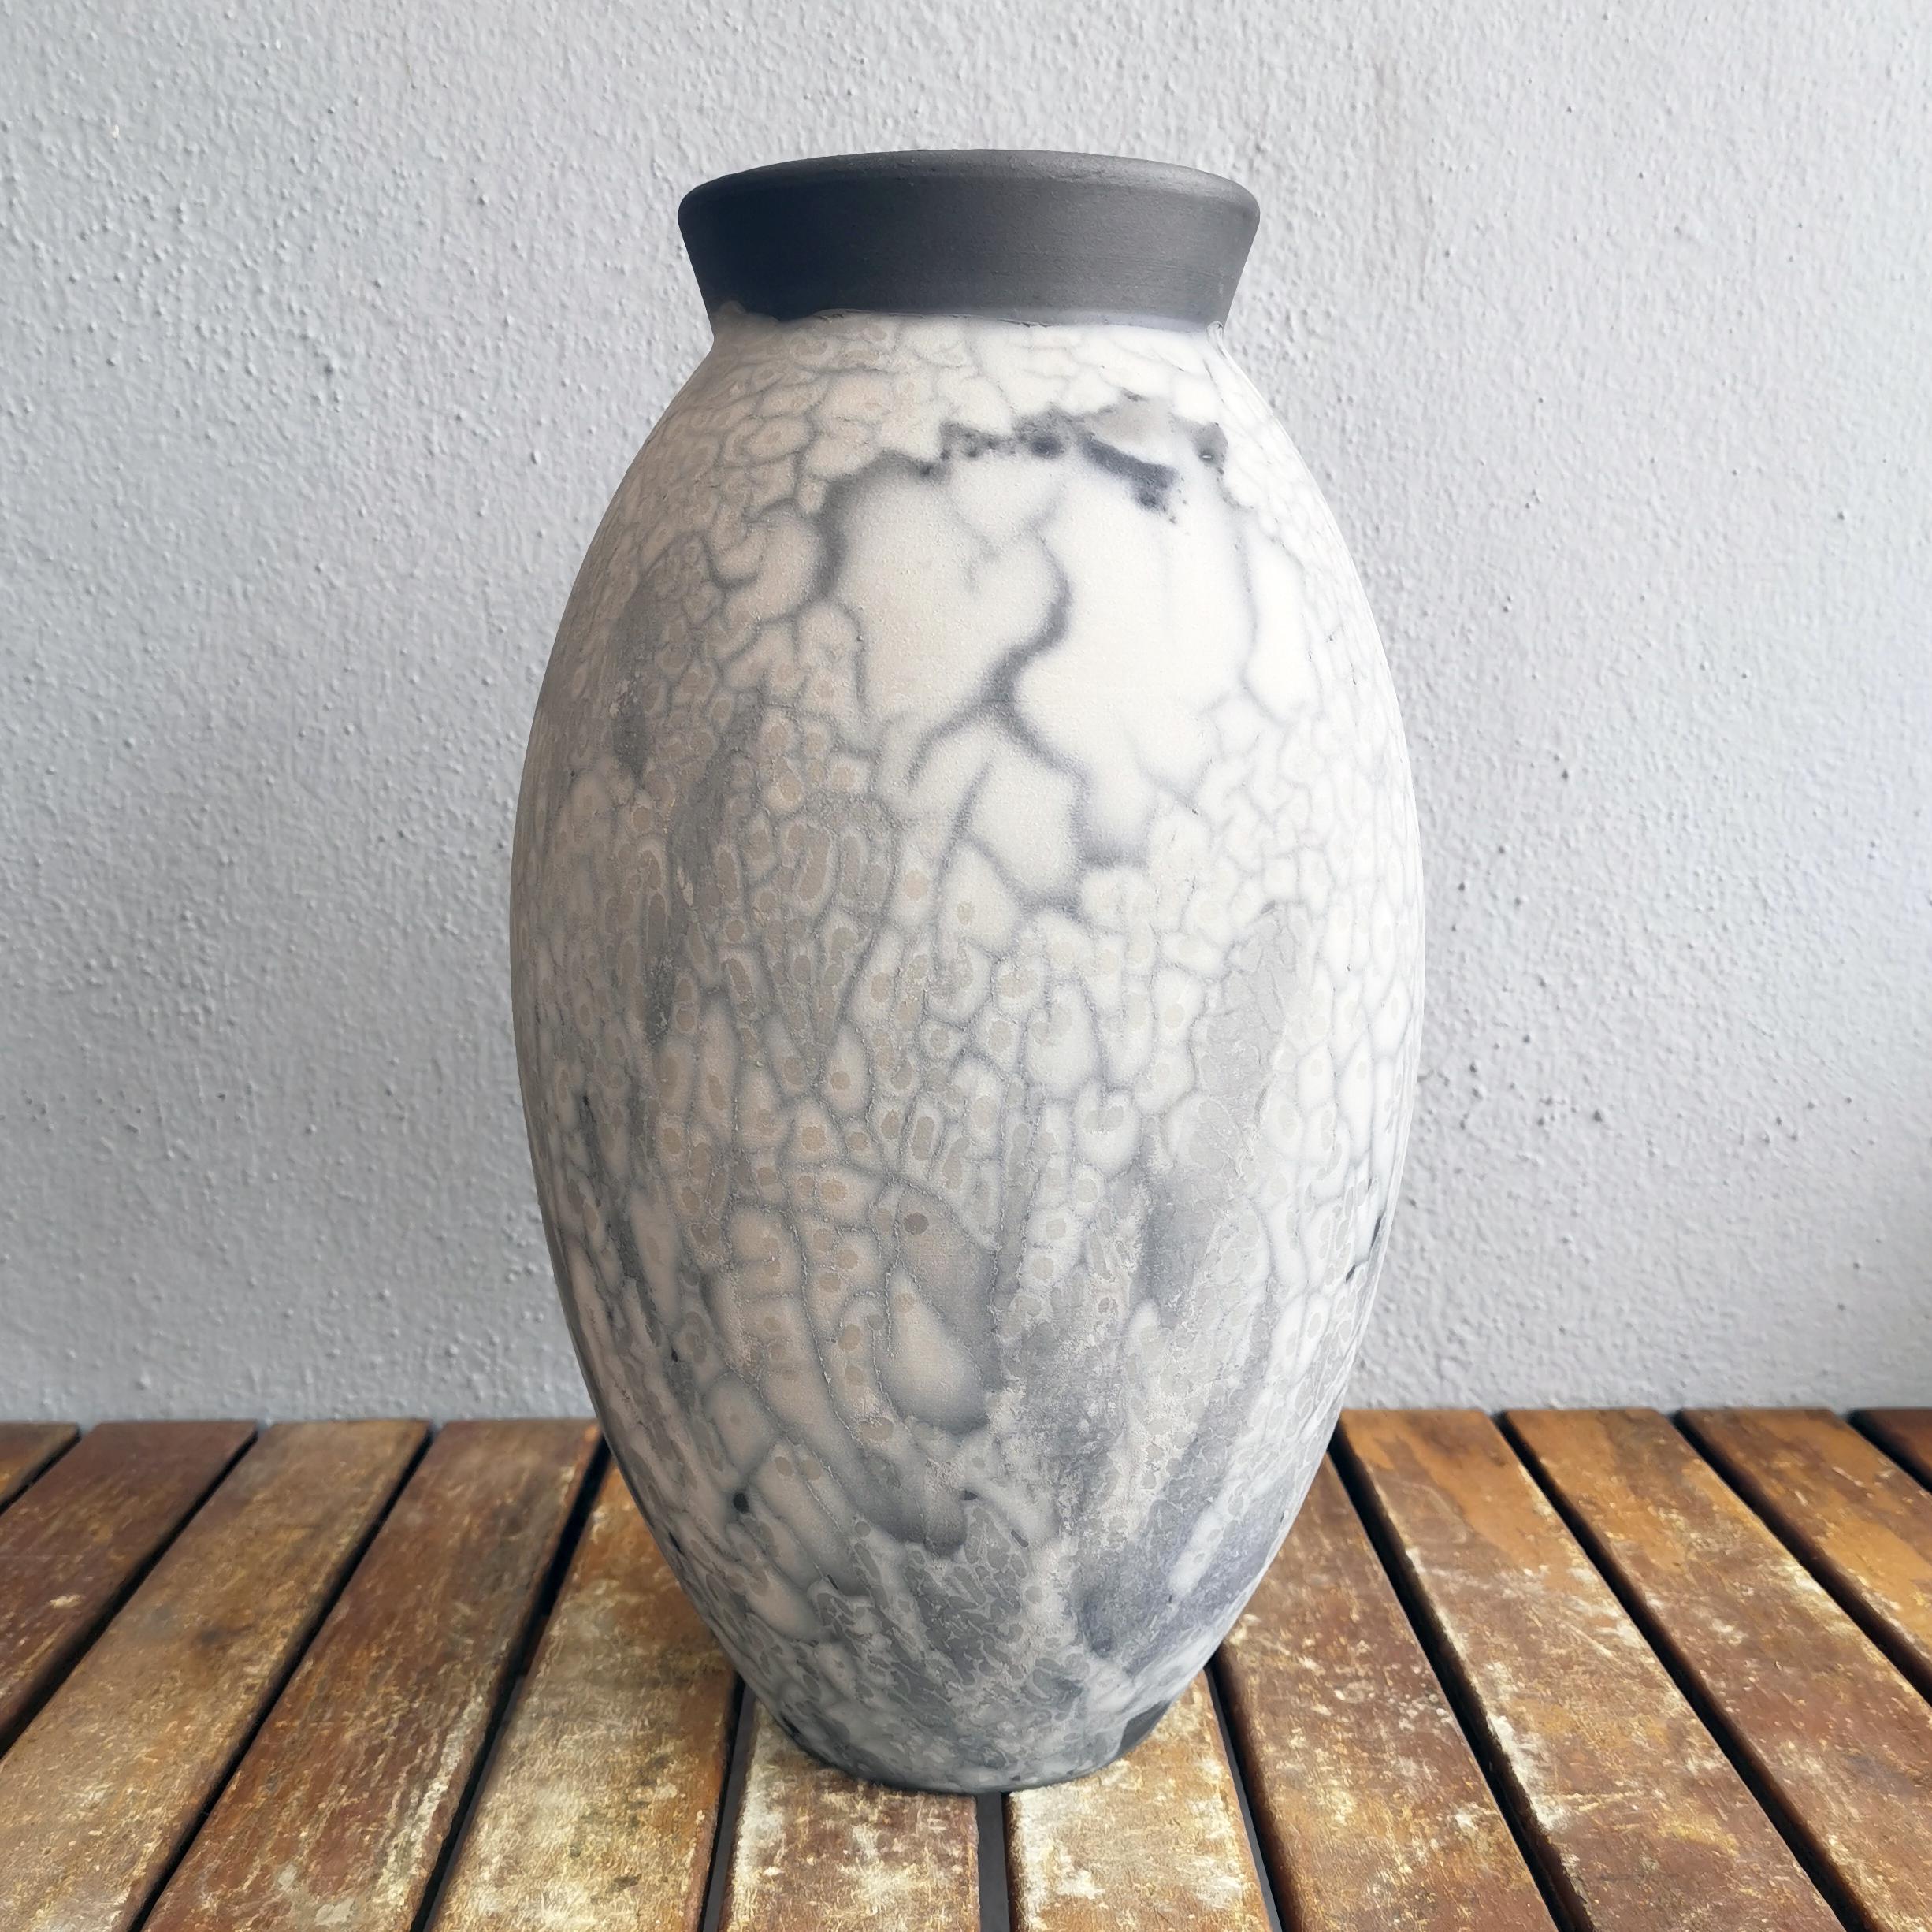 The Oval Vase is a tall, teardrop-shaped design best for adding a touch of elegance and intrigue to an interior space. Made using the Raku technique, it easily becomes a great conversation starter.

Smoked Raku is more commonly known as 'Naked'